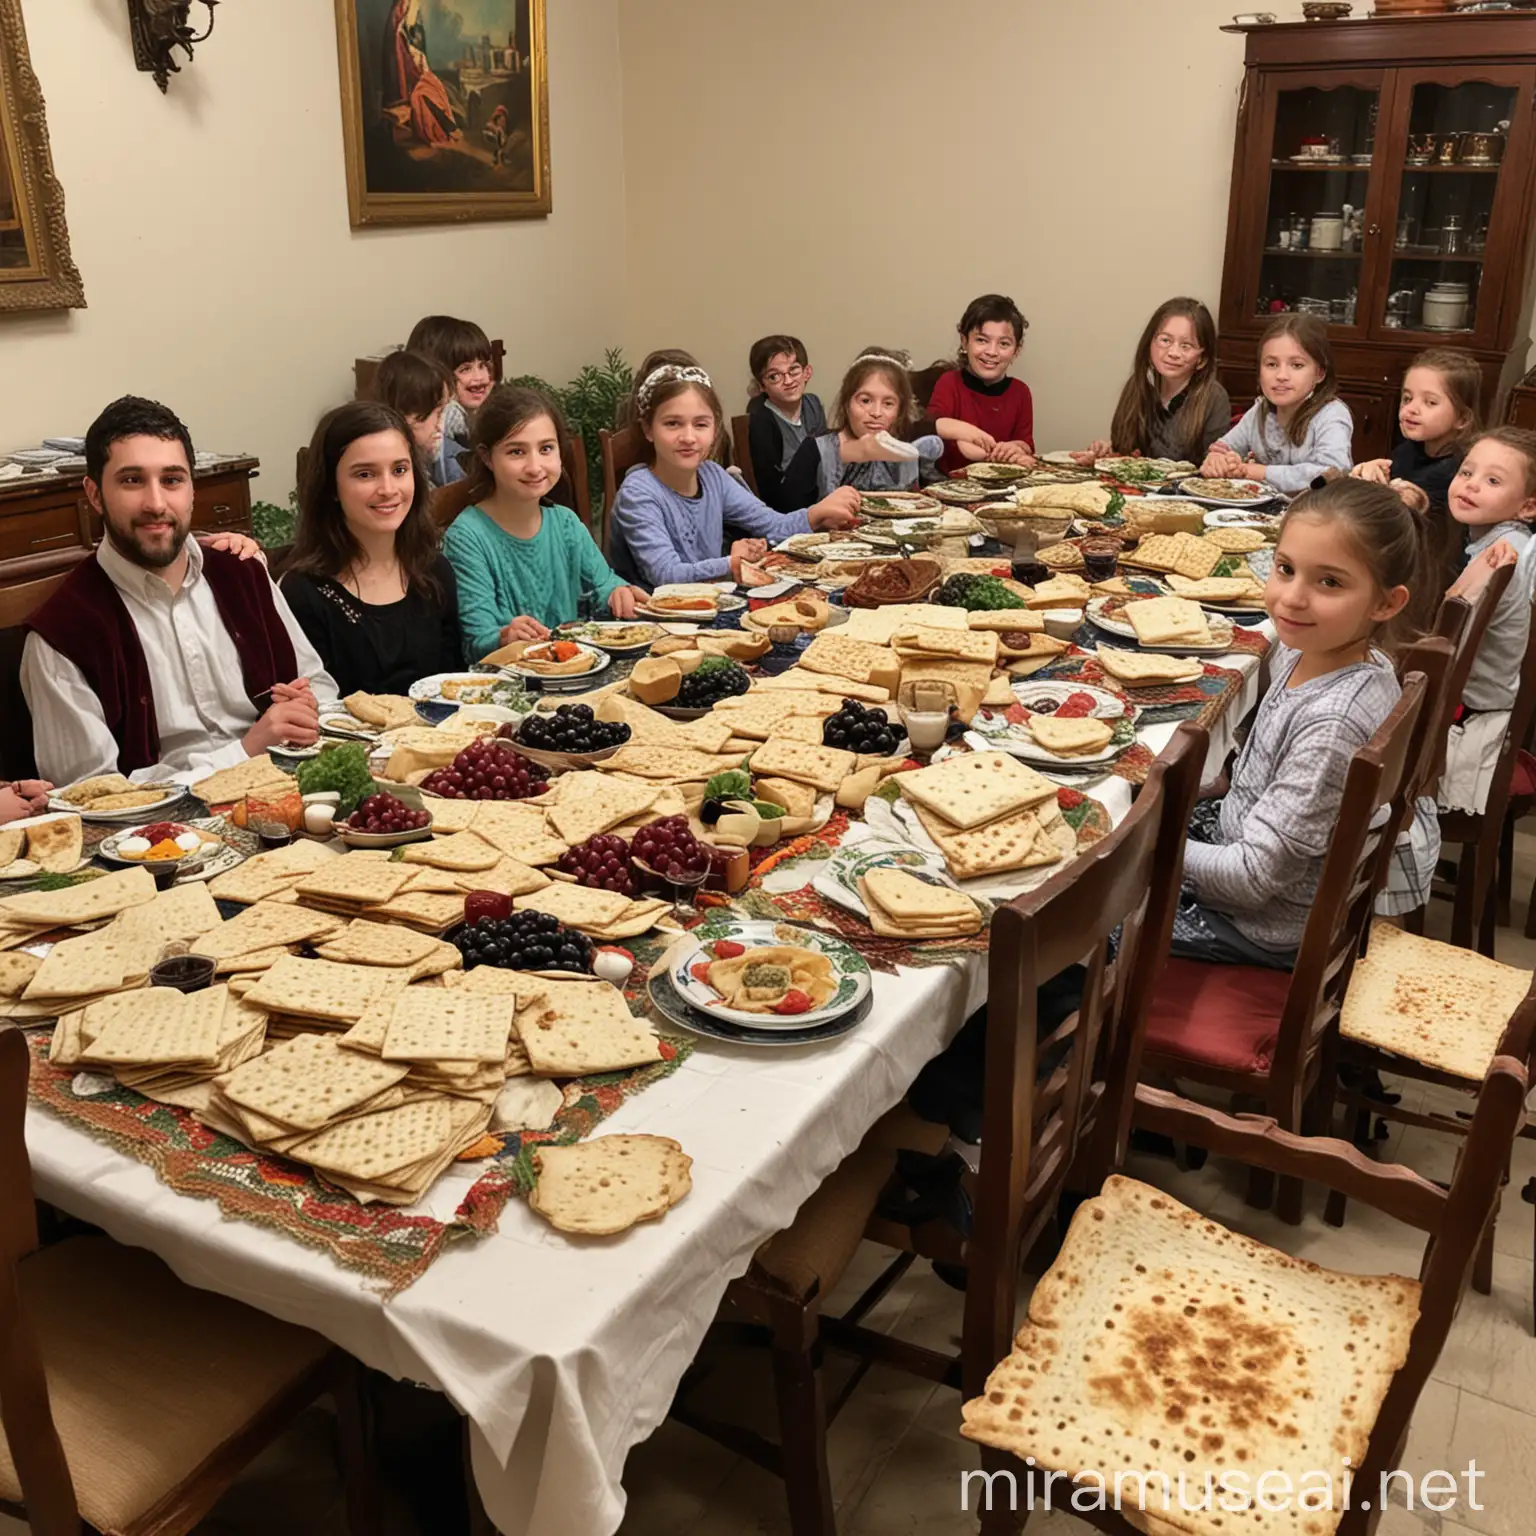 There is a table. There are Passover plates. There are children and adults. There is wine and grape juice. There is food. There is a giant table. There are many chairs. There is matzo.